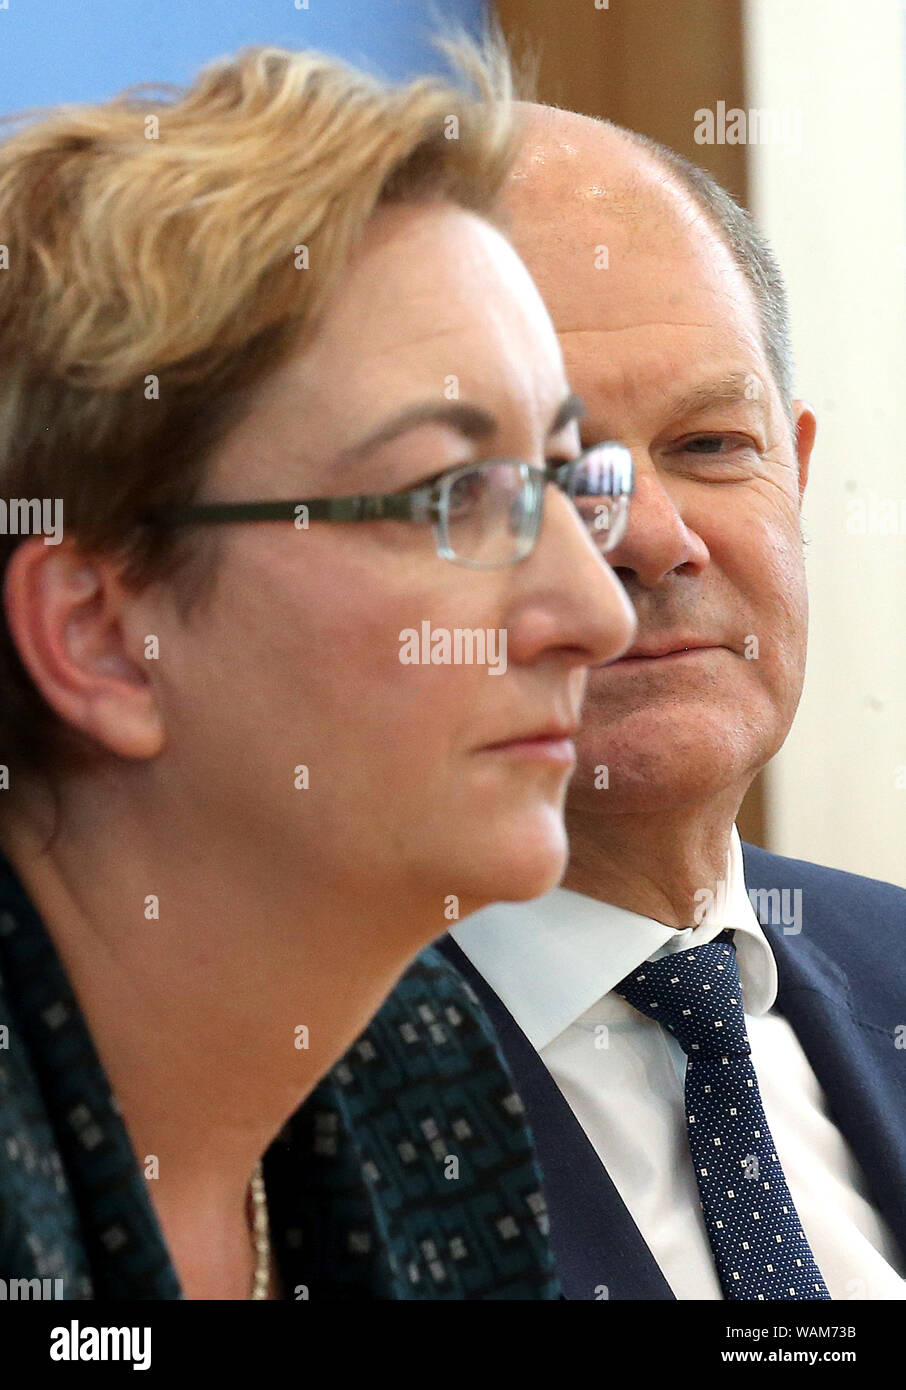 Berlin, Germany. 21st Aug, 2019. Olaf Scholz, Federal Minister of Finance, and Klara Geywitz, Member of the State Parliament for Brandenburg, are sitting at the Federal Press Conference to announce their candidacy for the chairmanship of the SPD. Credit: Wolfgang Kumm/dpa/Alamy Live News Stock Photo